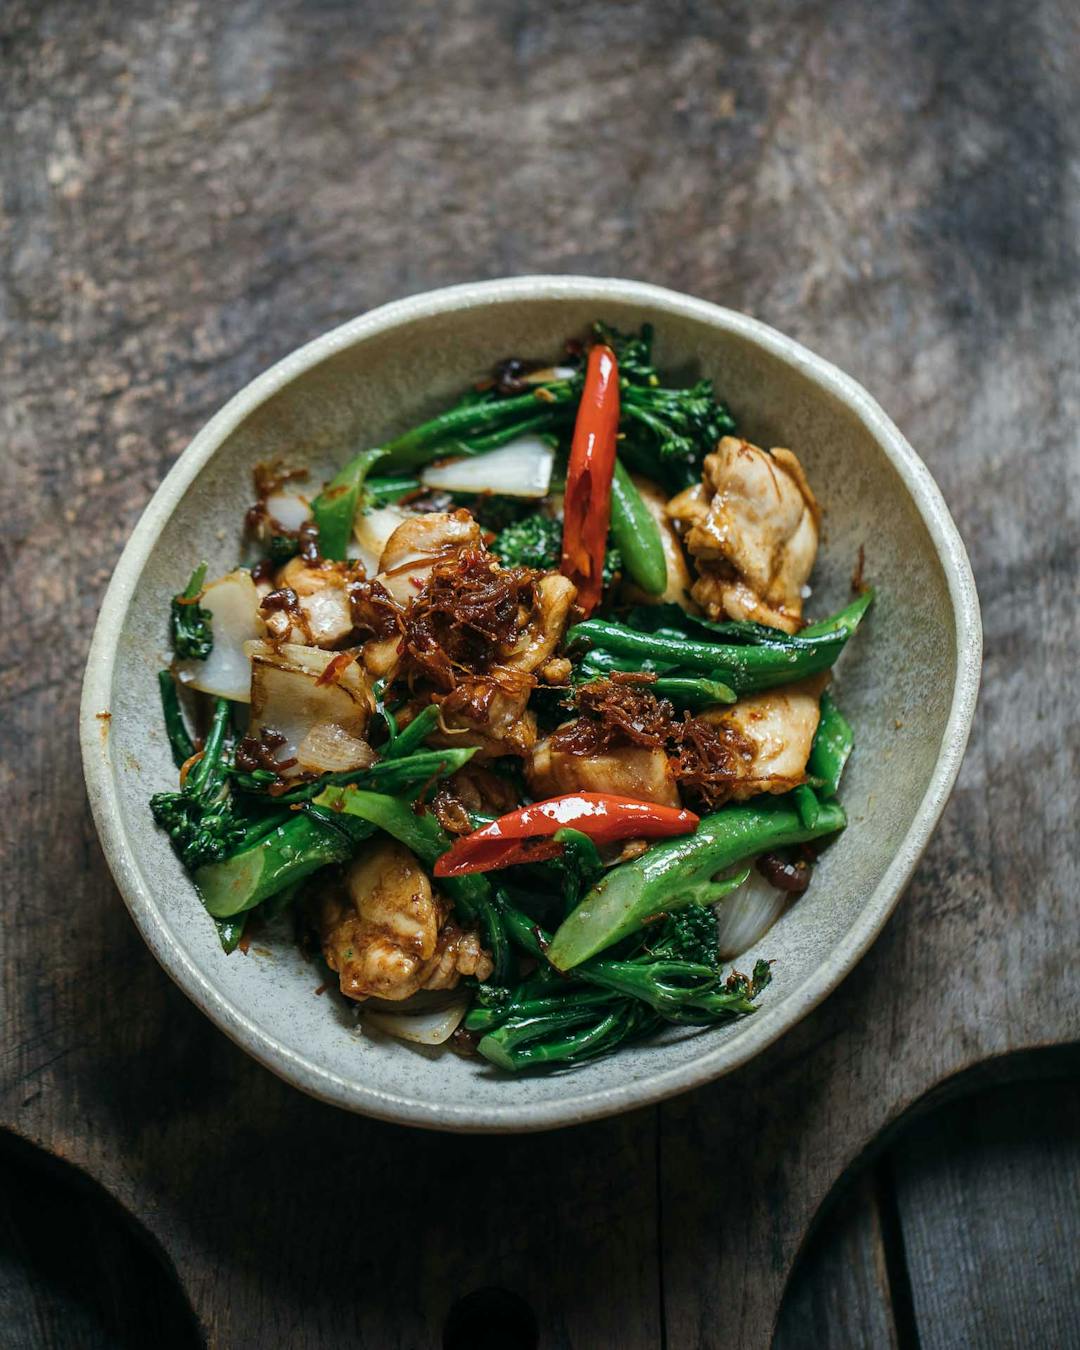 Chicken and broccolini with XO sauce